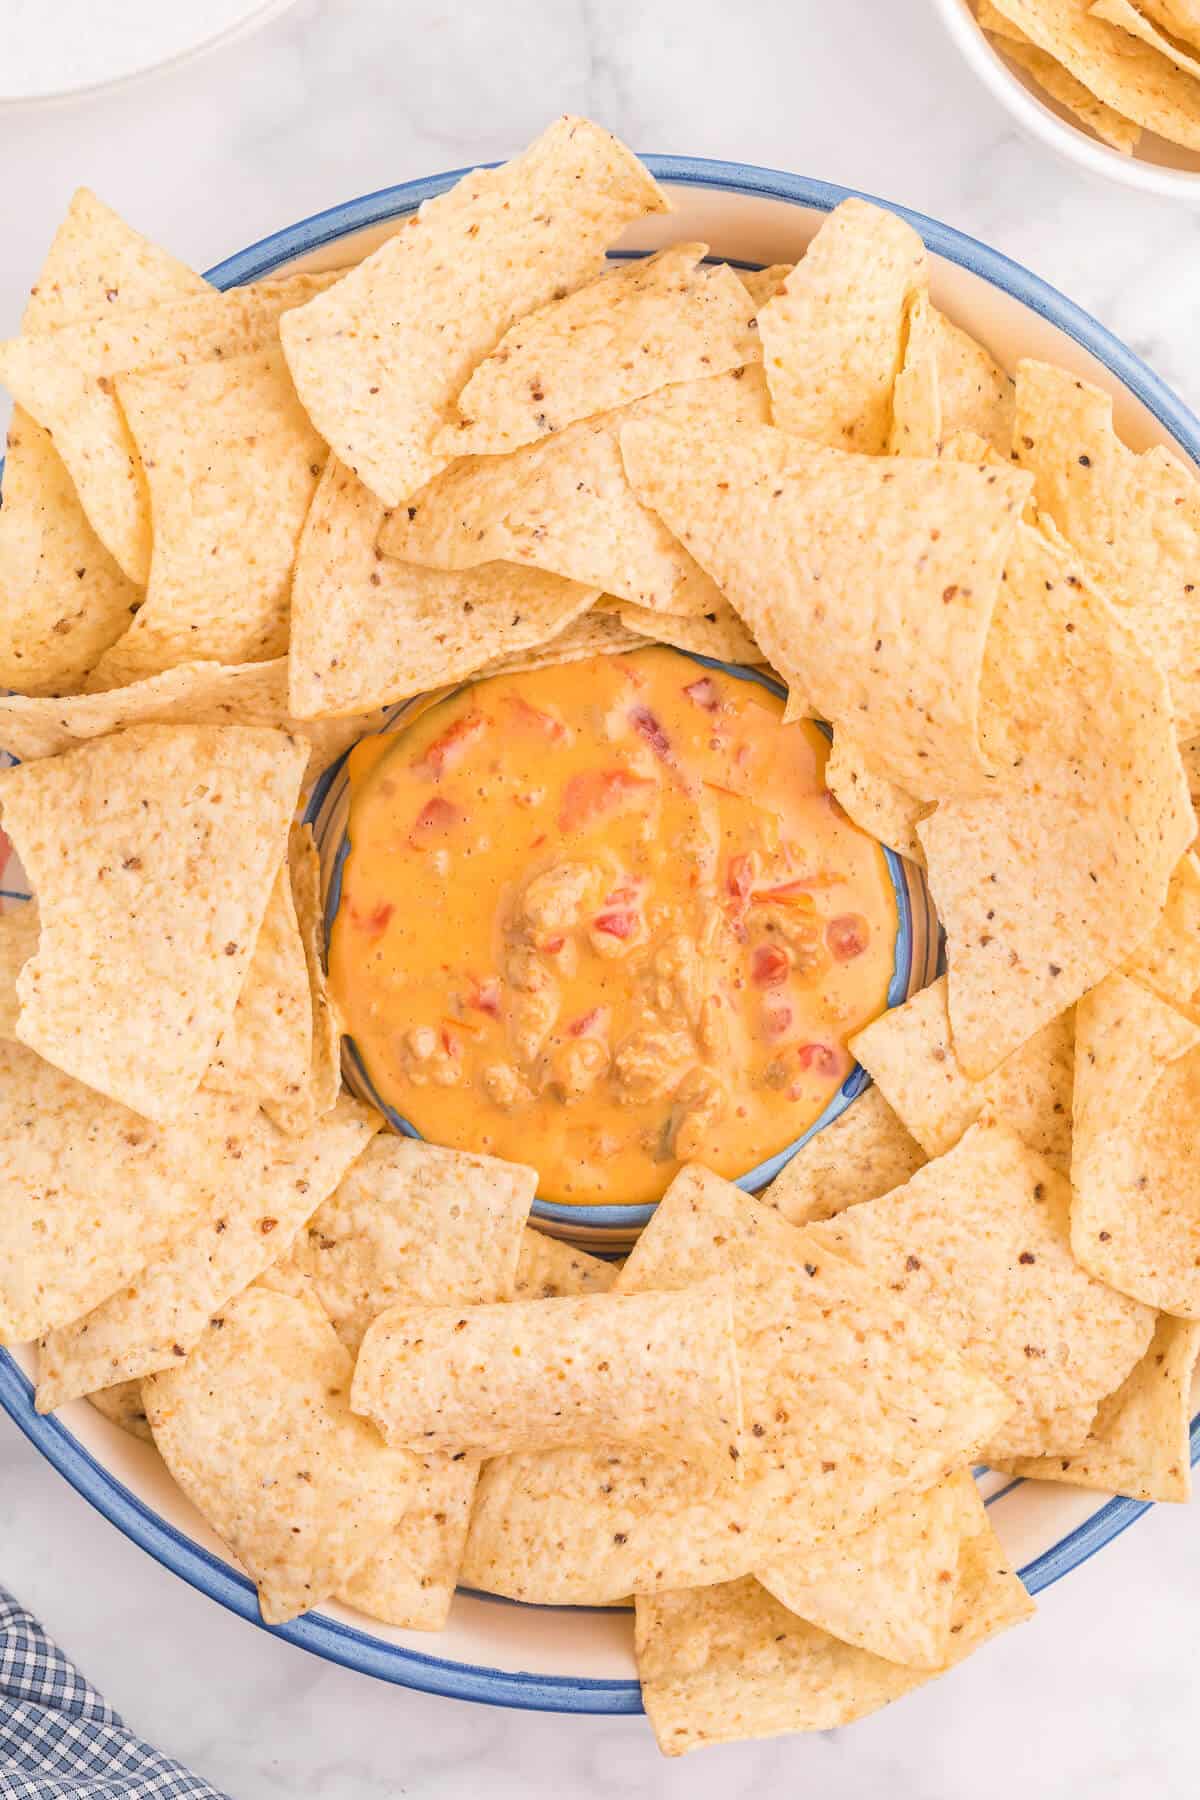 Chicken Queso Dip - It’s meaty, creamy and tastes amazing on top of a tortilla chips. This queso dip is seriously addicting!